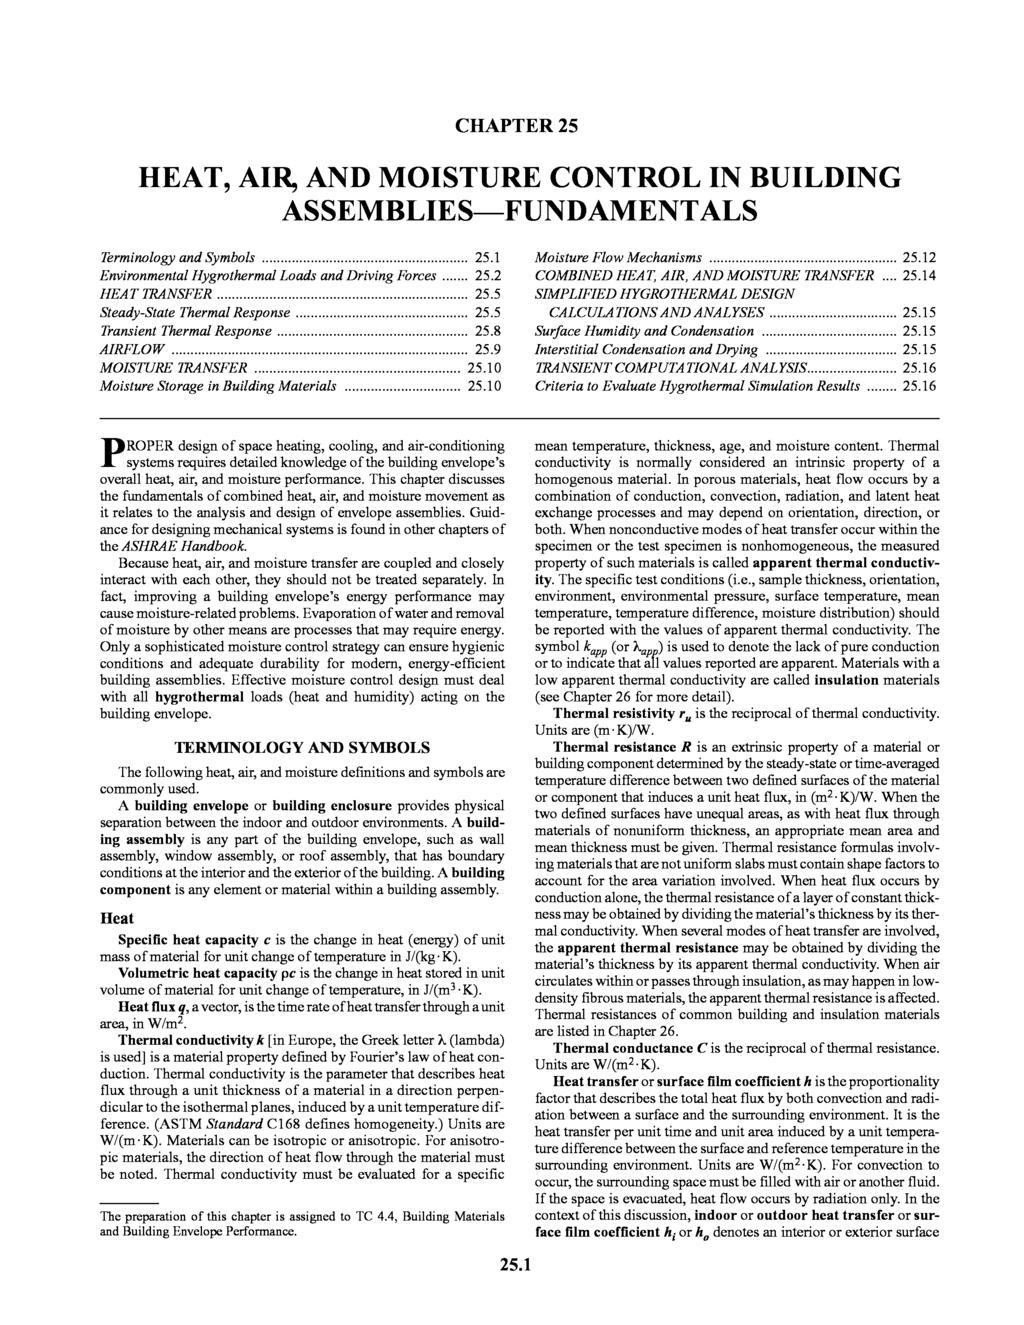 CHAPTER 25 HEAT, AIR, AND MOISTURE CONTROL IN BUILDING ASSEMBLIES FUNDAMENTALS Terminology and Symbols 25.1 Environmental Hygrothermal Loads and Driving Forces 25.2 HEAT TRANSFER 25.